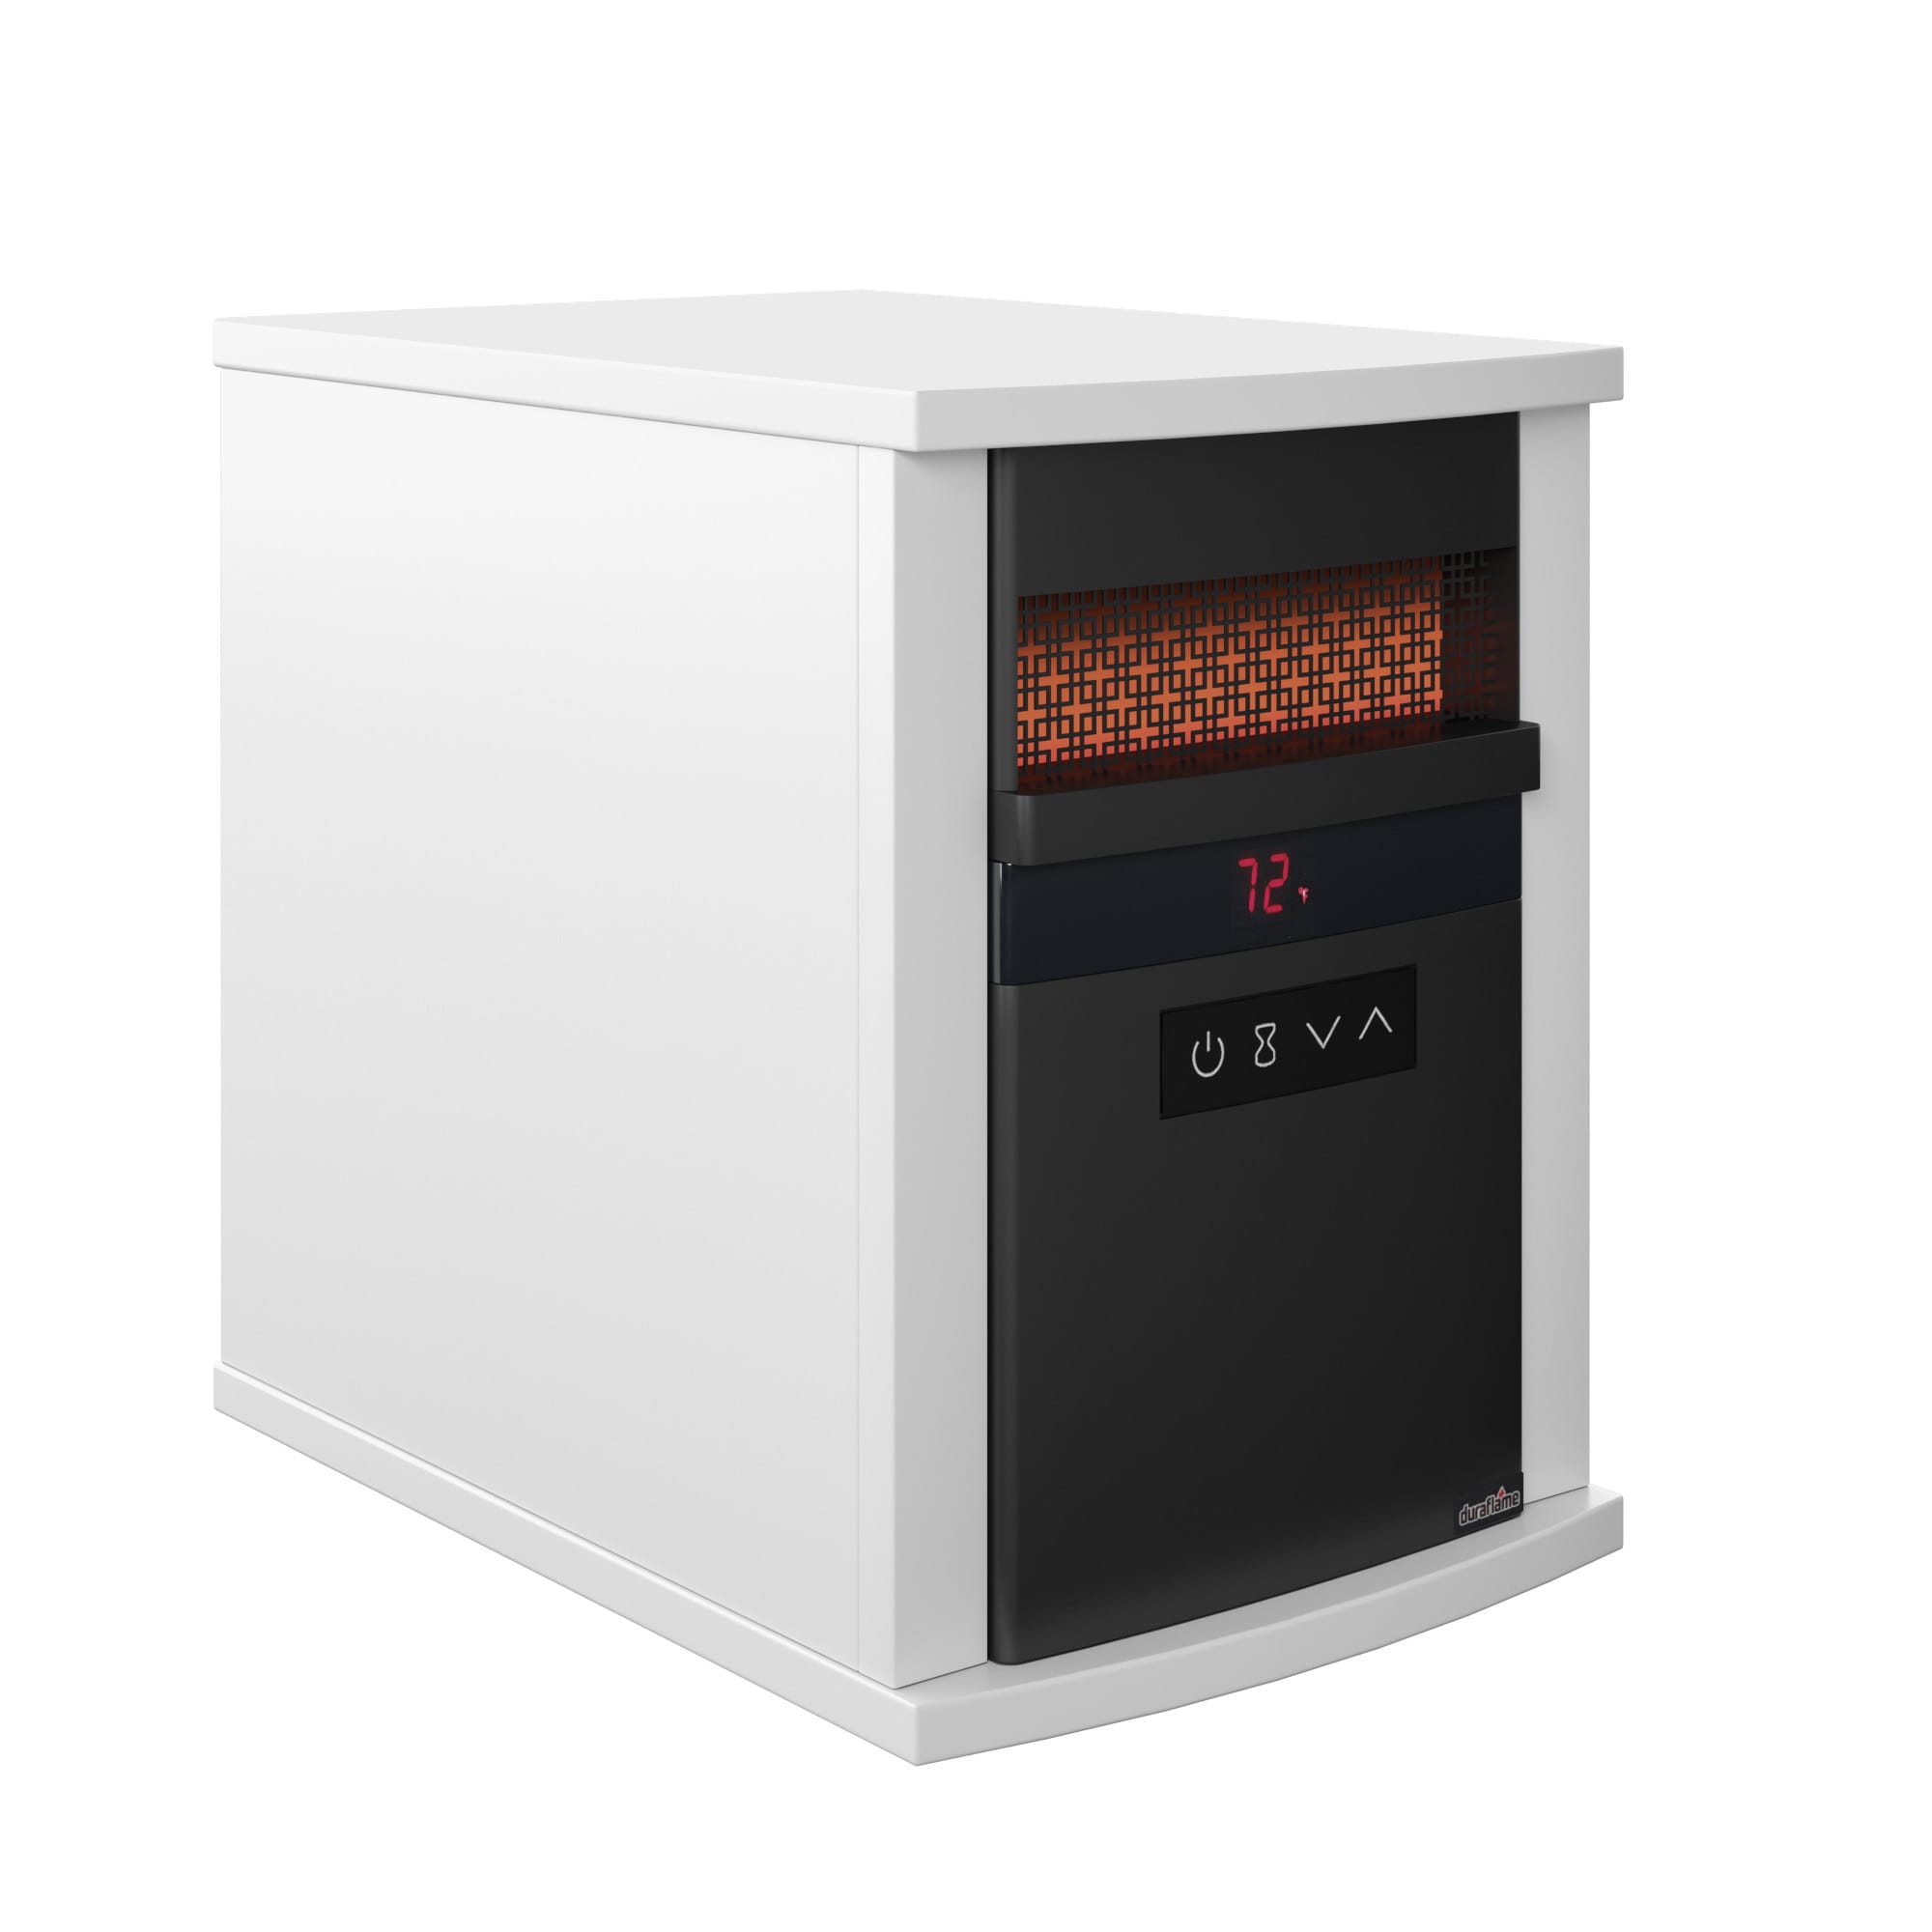 Duraflame 1500-Watt Infrared Cabinet Indoor Electric Space Heater with Thermostat and Remote Included